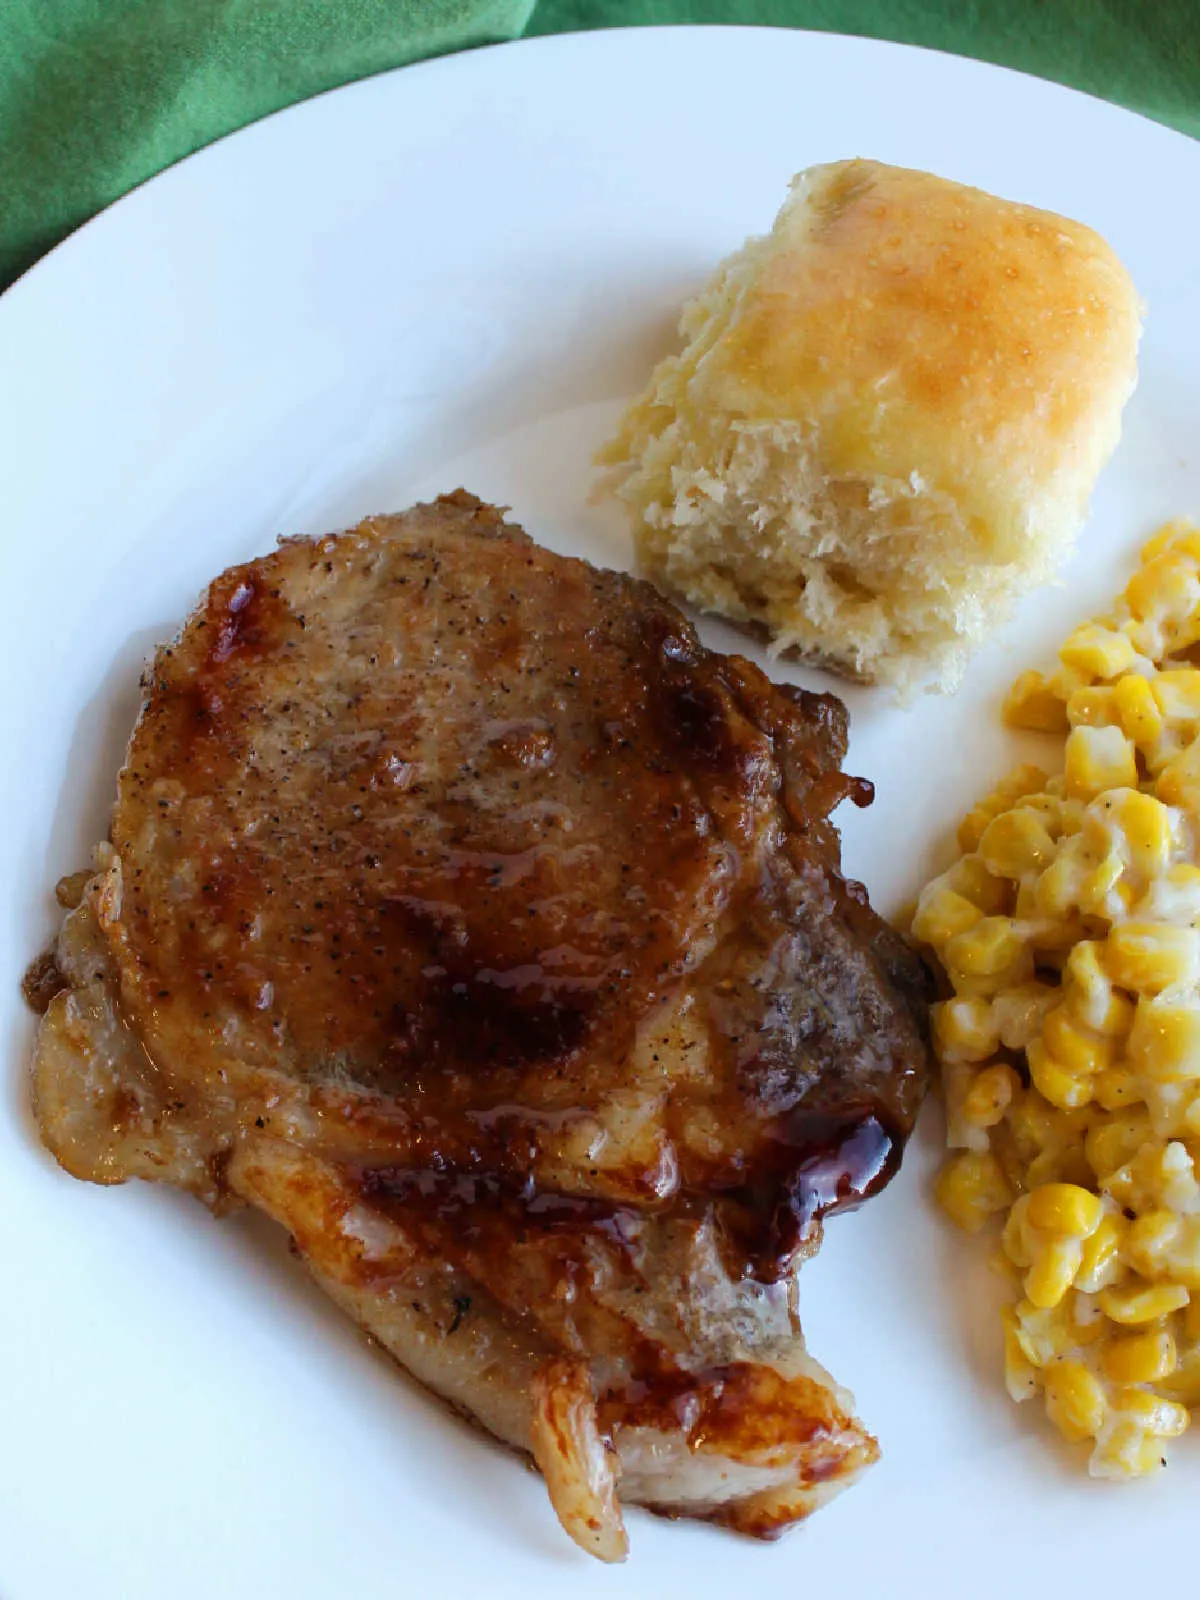 Dinner plate with large braised pork chop with shiny brown glaze served with cheesy corn and a homemade pineapple Hawaiian dinner roll.